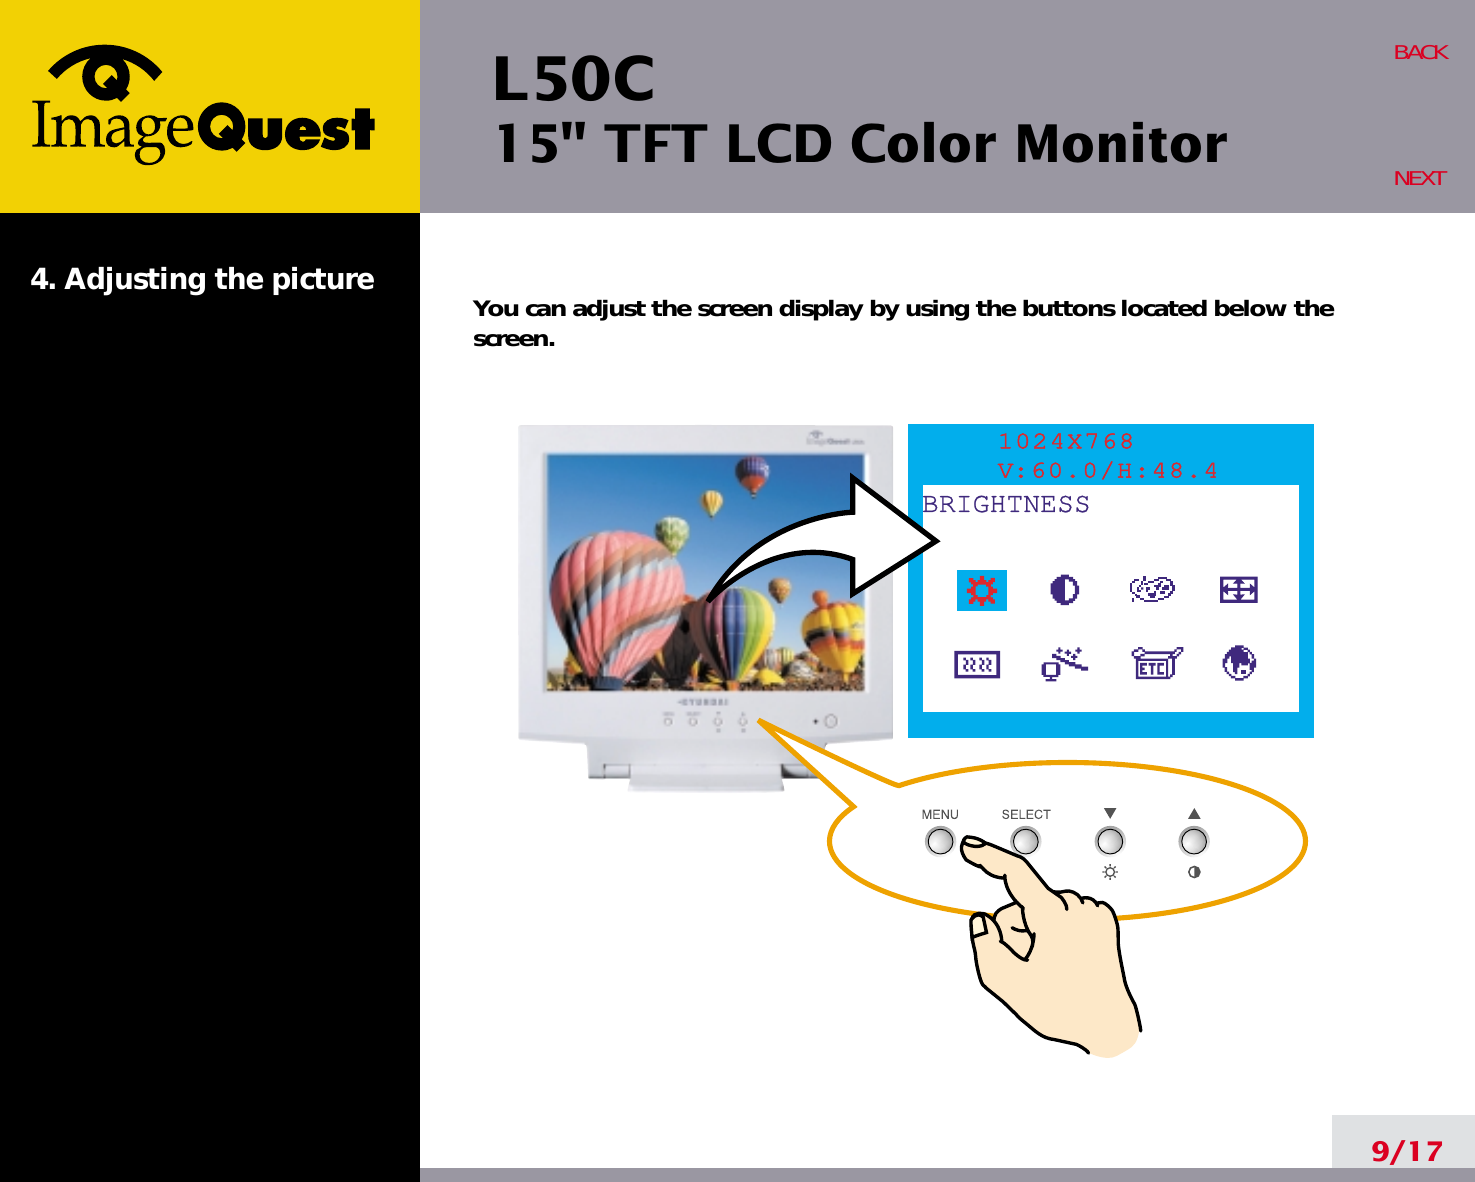 L50C15&quot; TFT LCD Color Monitor4. Adjusting the picture9/17BACKNEXTYou can adjust the screen display by using the buttons located below thescreen.1024X768V:60.0/H:48.4BRIGHTNESS